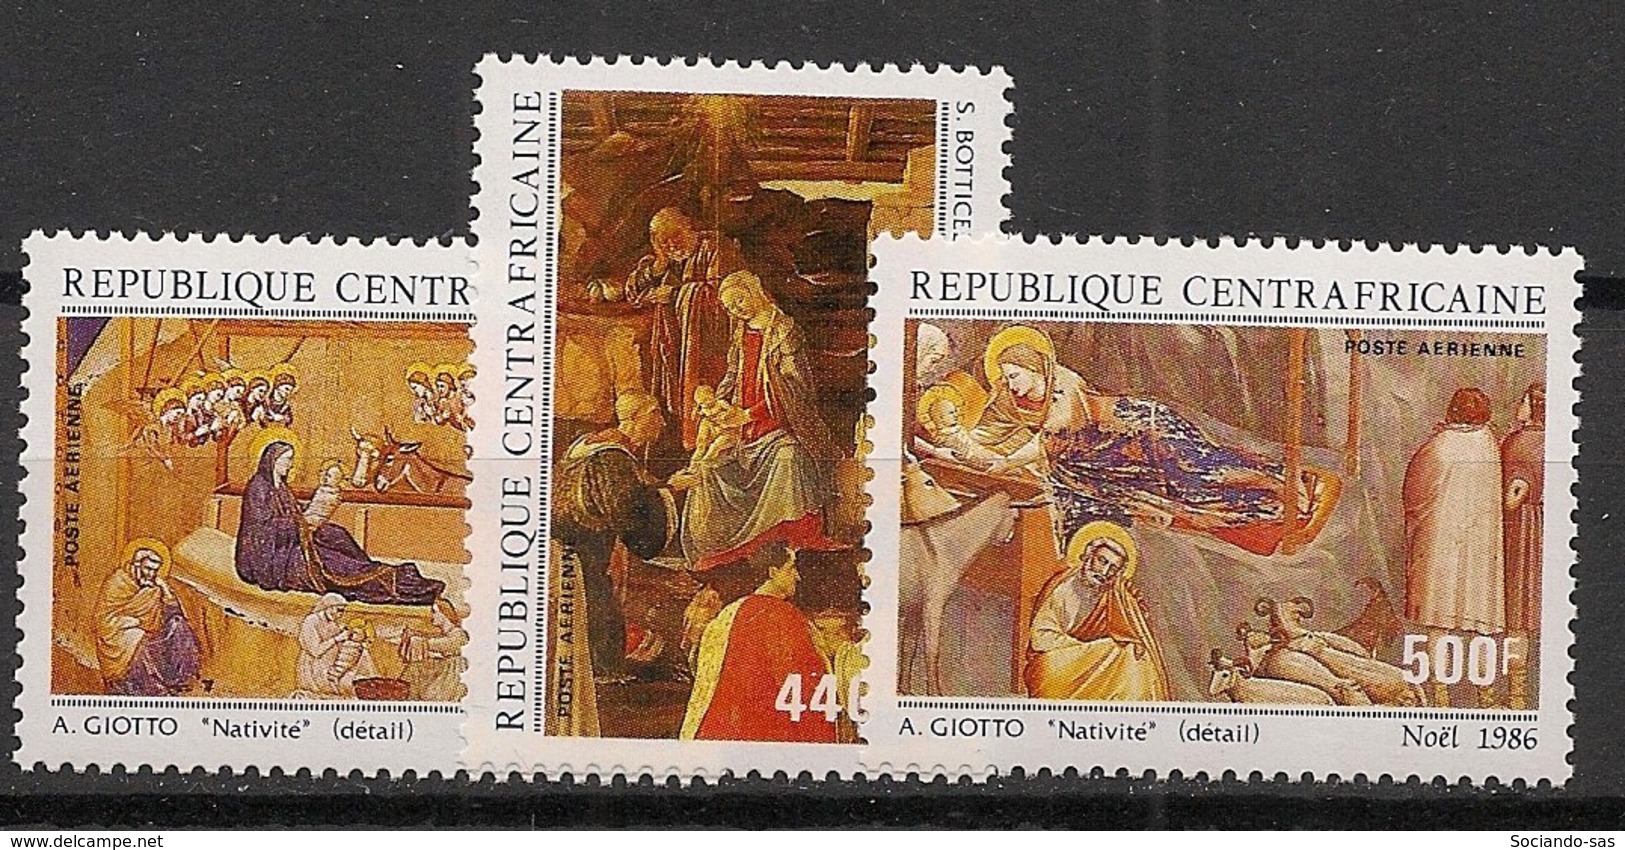 Centrafricaine - 1986 - Poste Aérienne PA N°Yv. 350 à 352 - Noel / Giotto - Neuf Luxe ** / MNH / Postfrisch - Religious